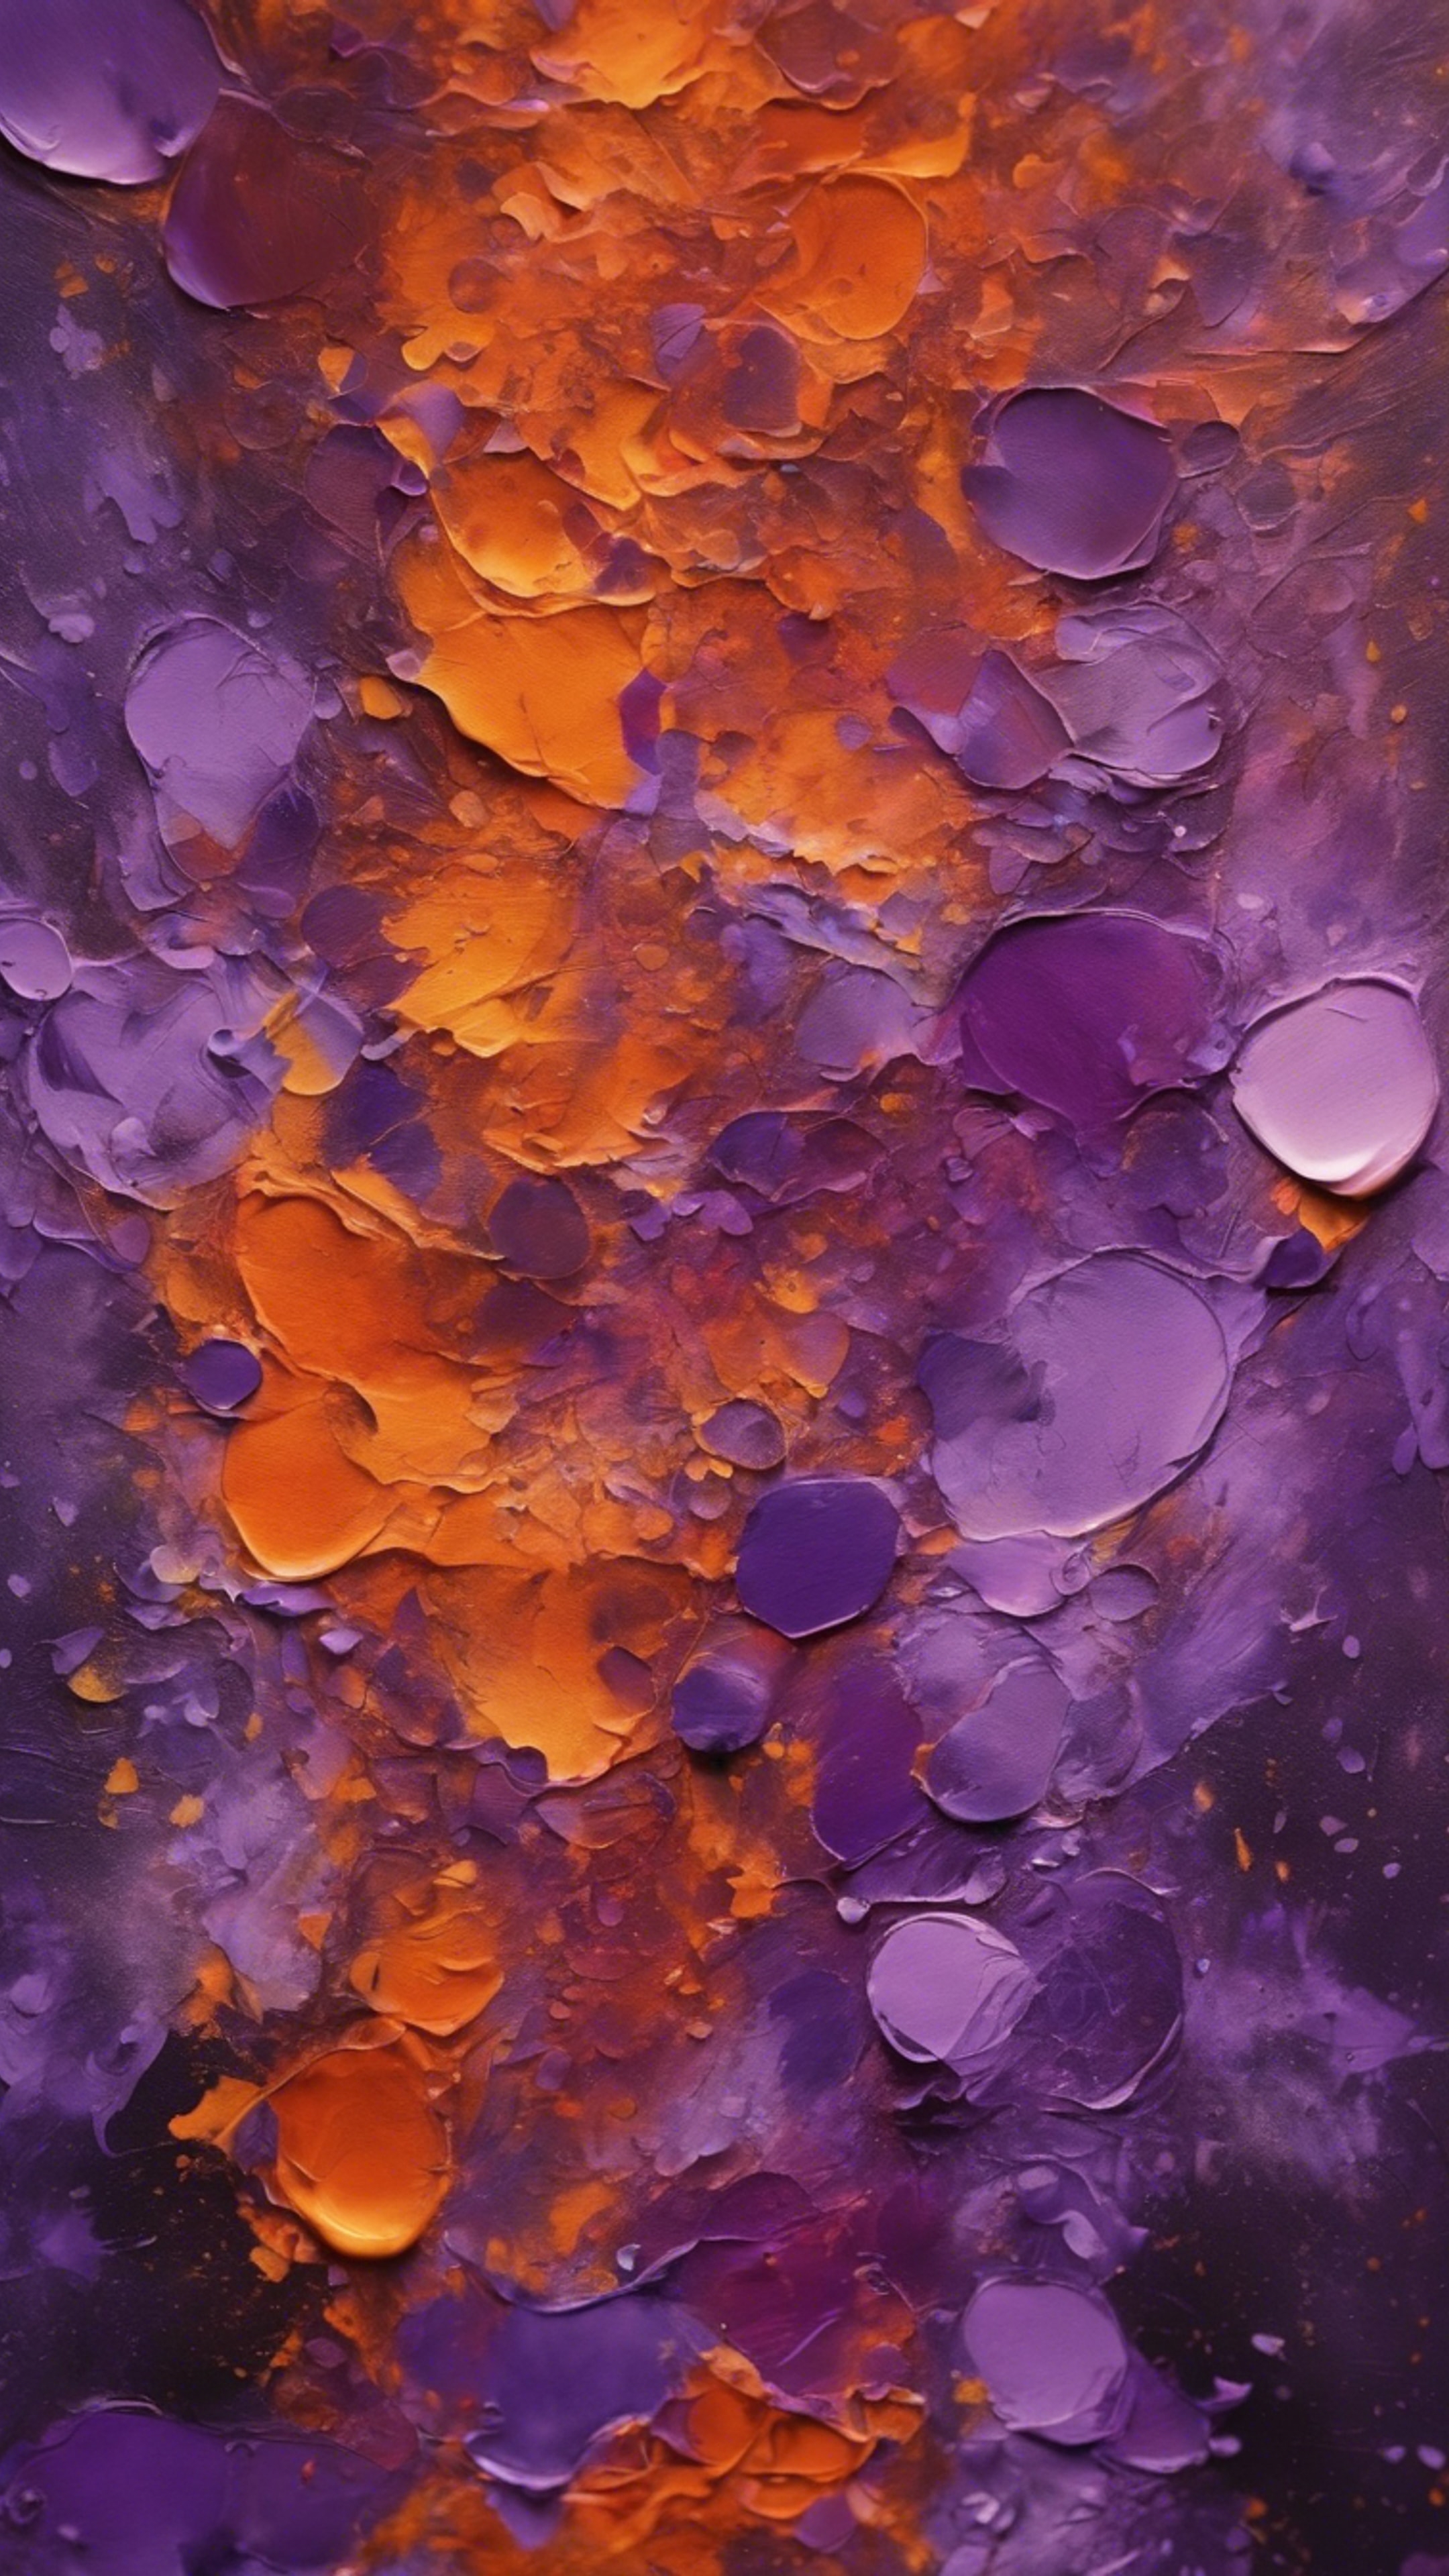 A vibrant abstract painting incorporating shades of cool purple and warm orange.壁紙[9b96d68f4ffb464d8908]